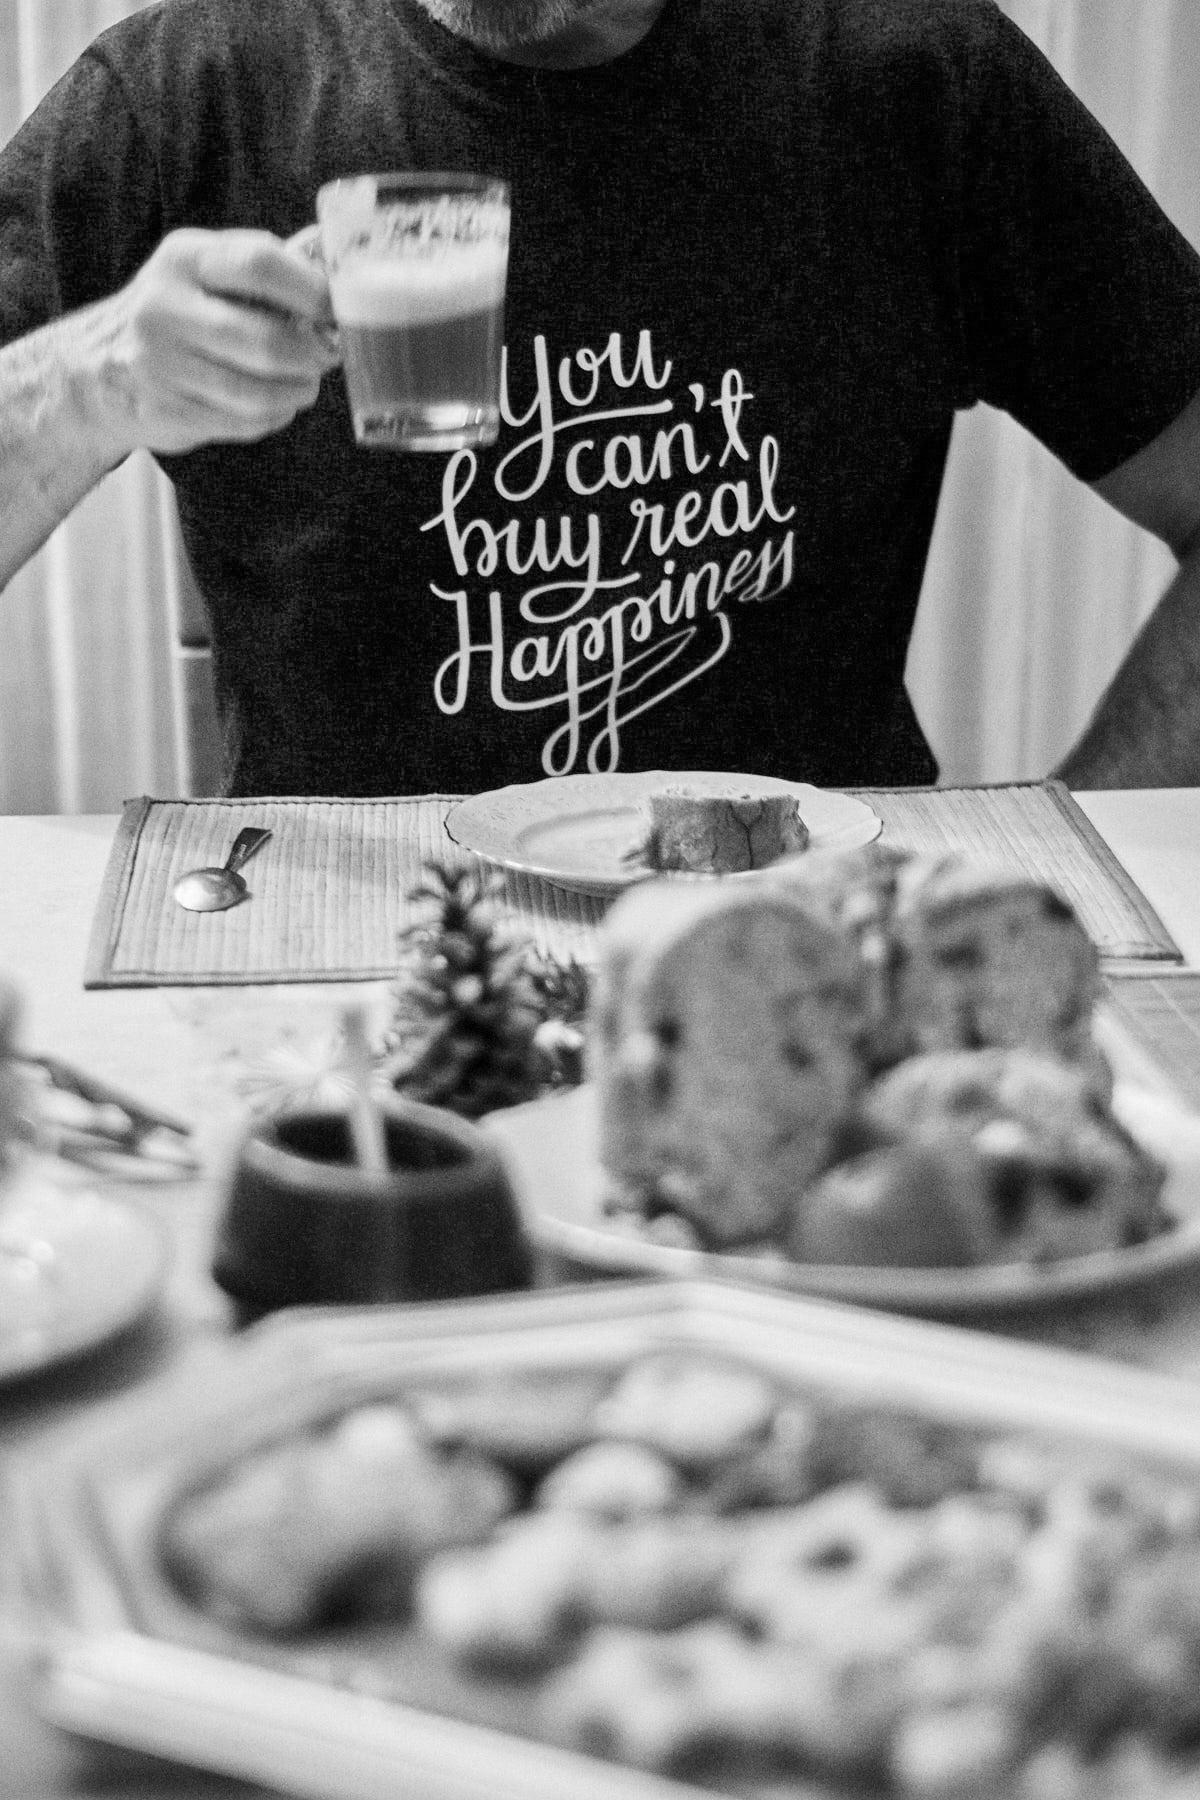 You can’t buy real Happiness T-Shirt